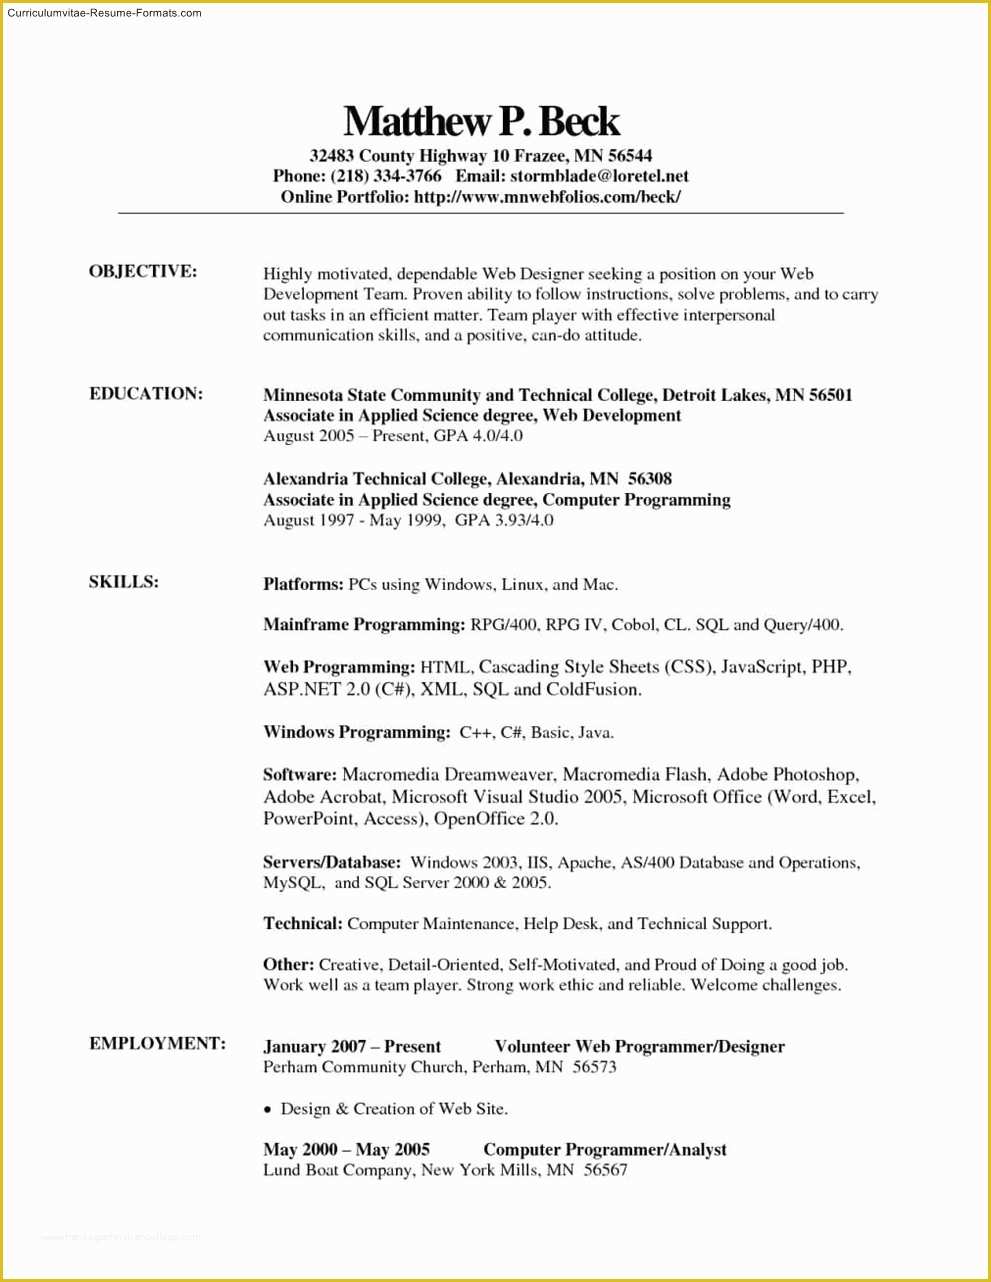 Microsoft Office Resume Templates Free Of Does Microsoft Fice Have A Resume Template Free